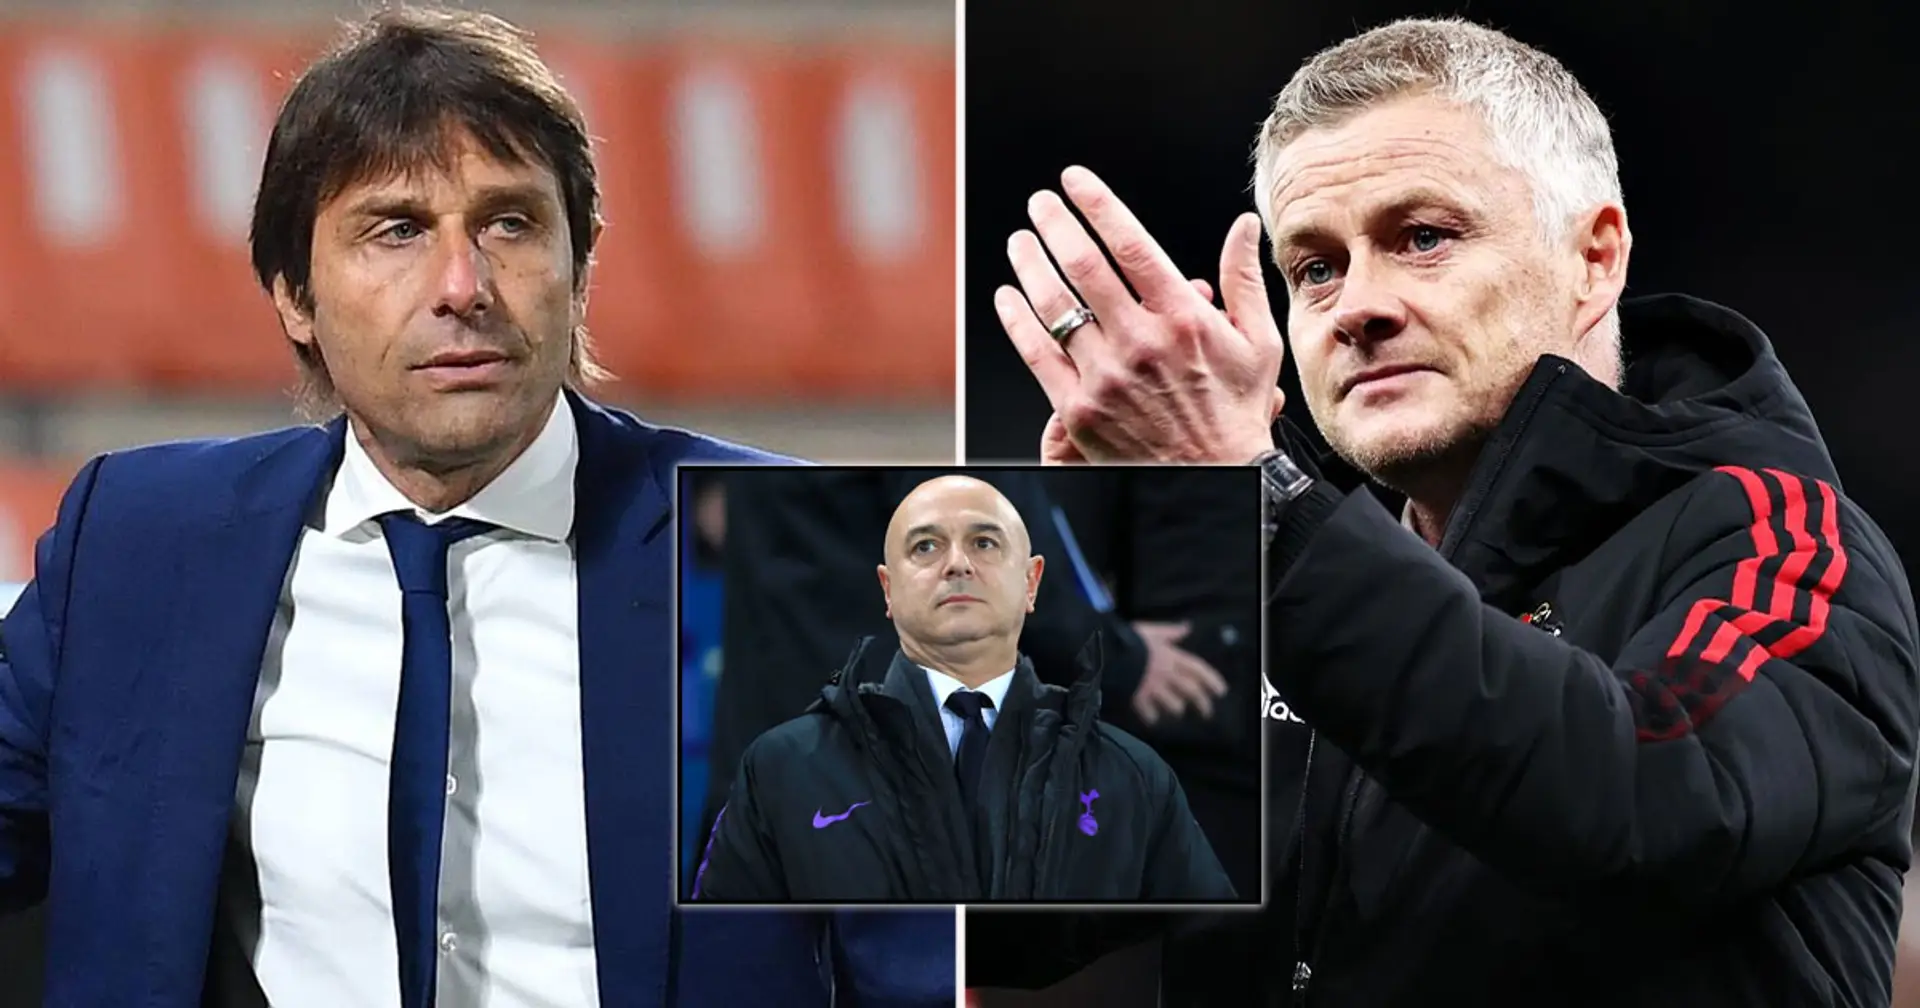 Antonio Conte 'could say yes' to Tottenham managerial offer amid United links